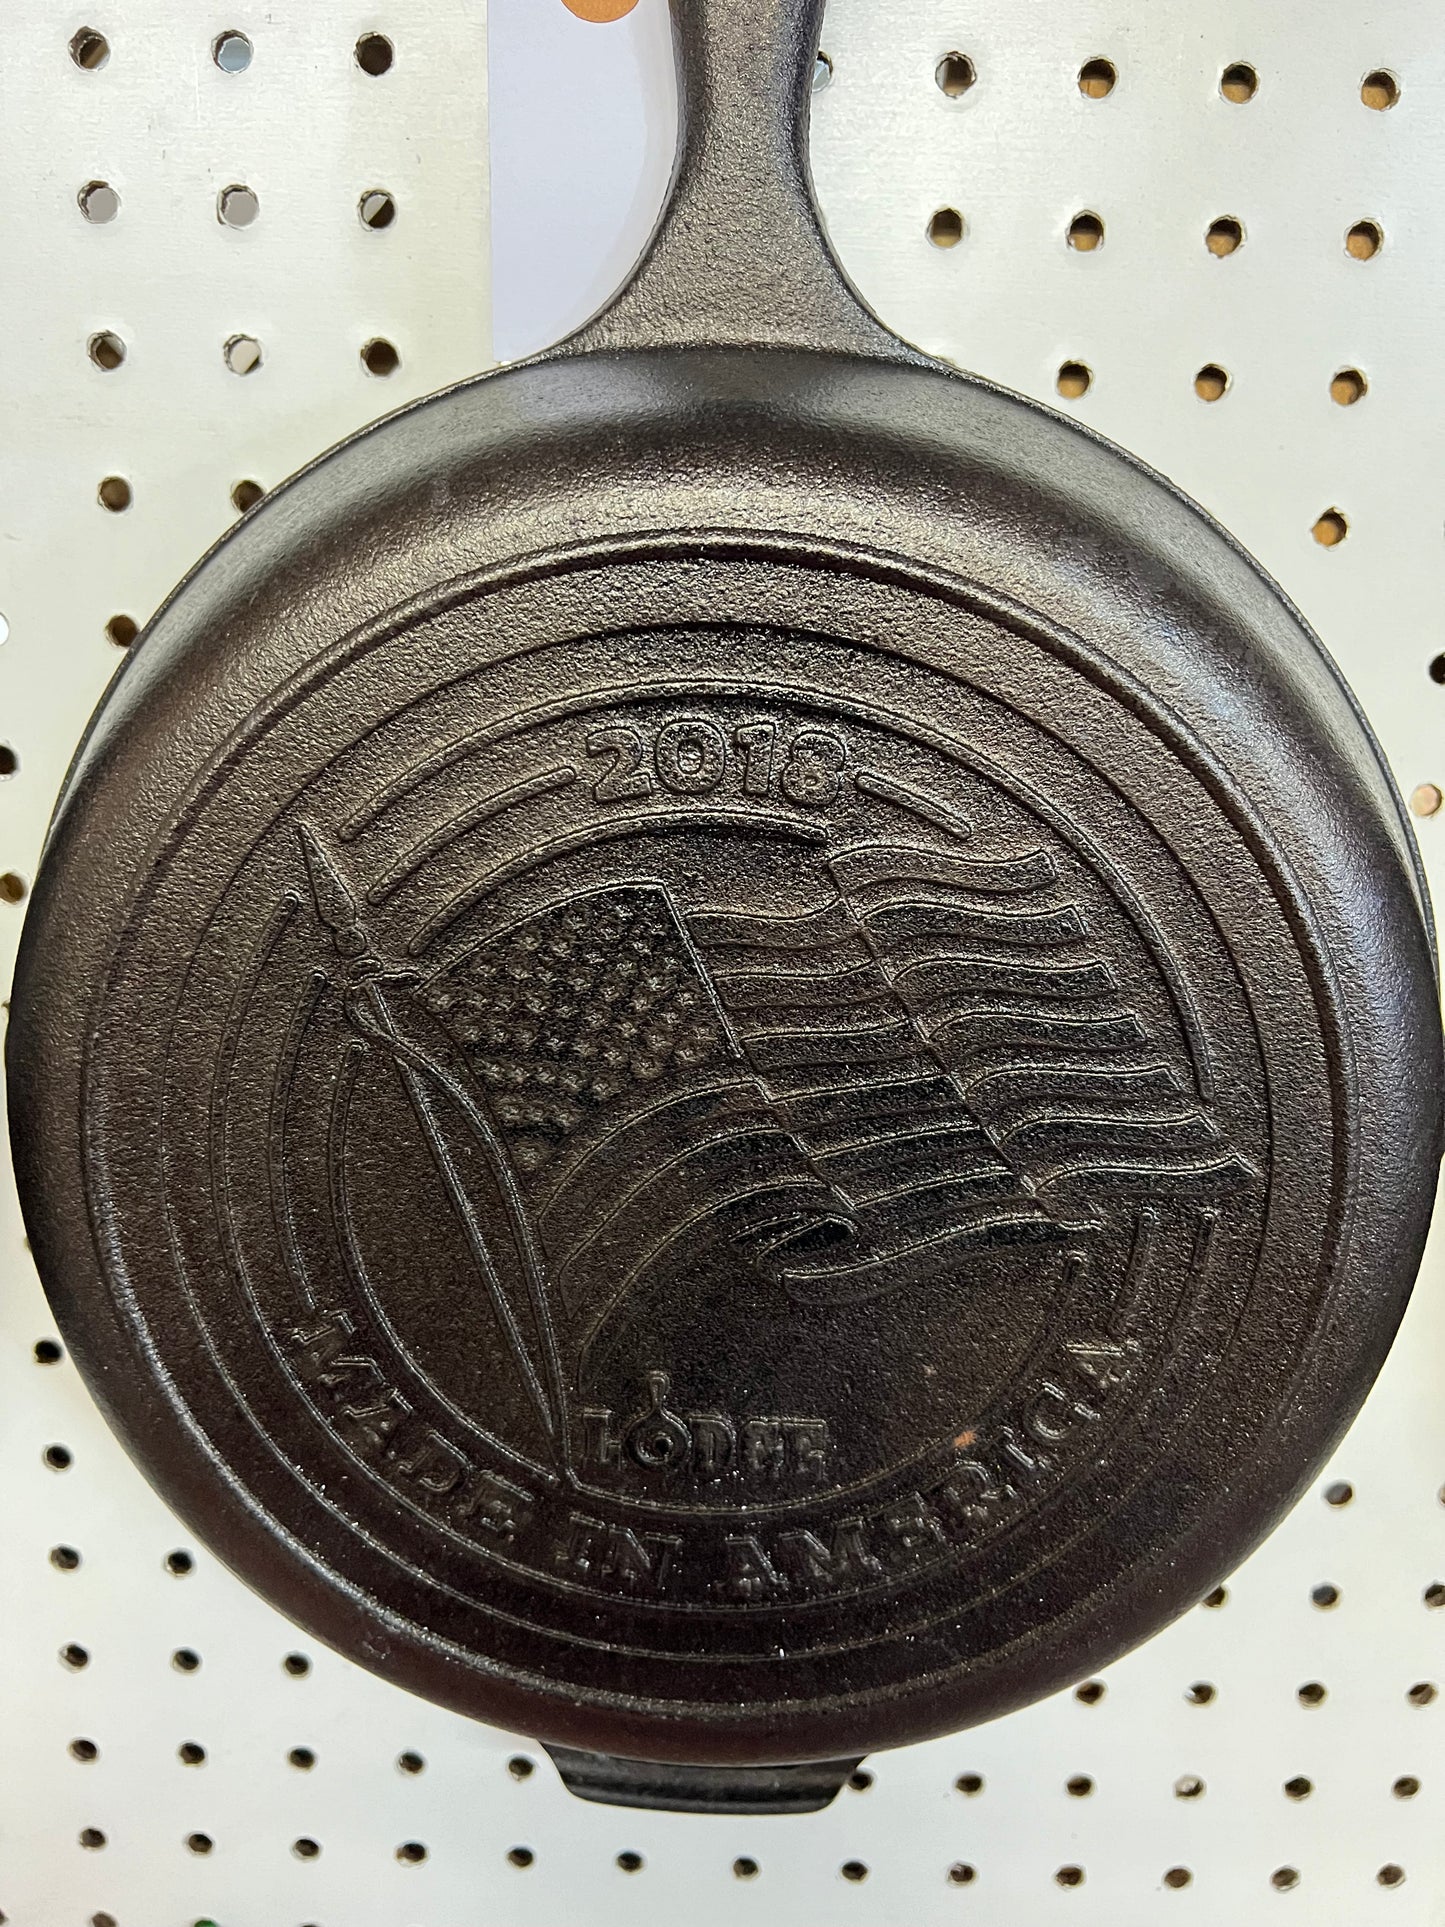 2018 made in America skillet with flag